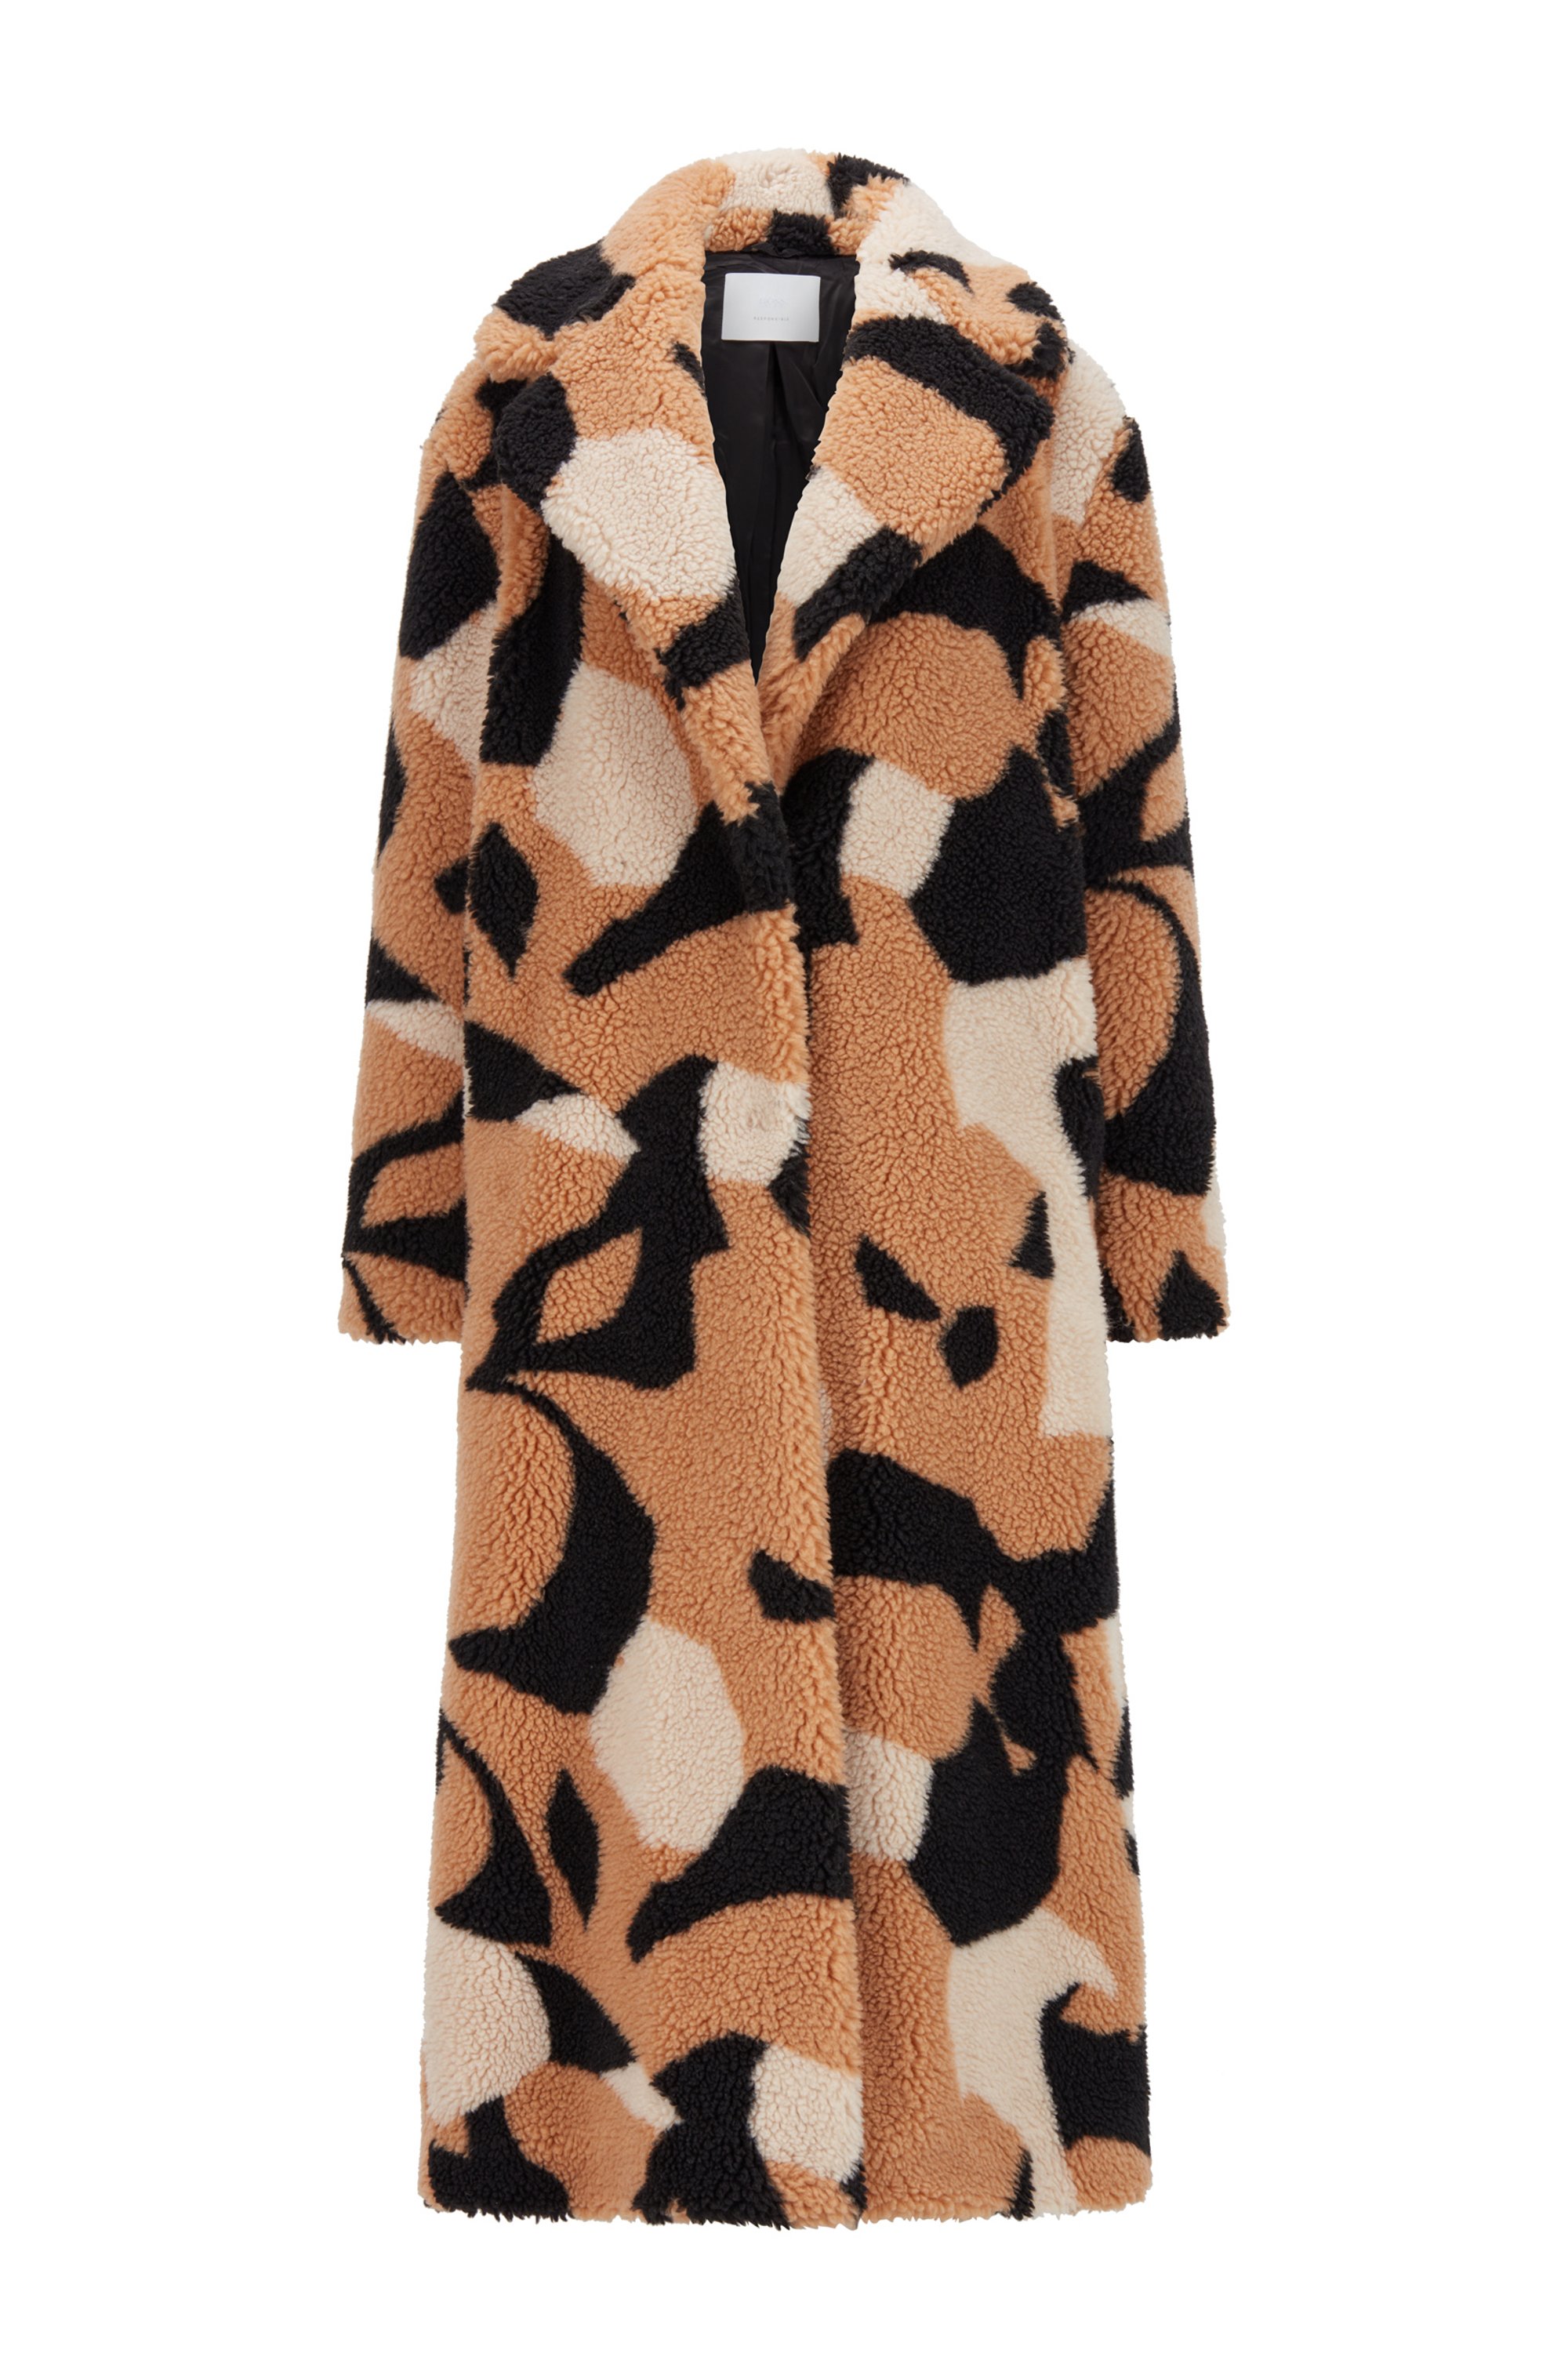 Collection-pattern teddy coat in a relaxed fit, Patterned